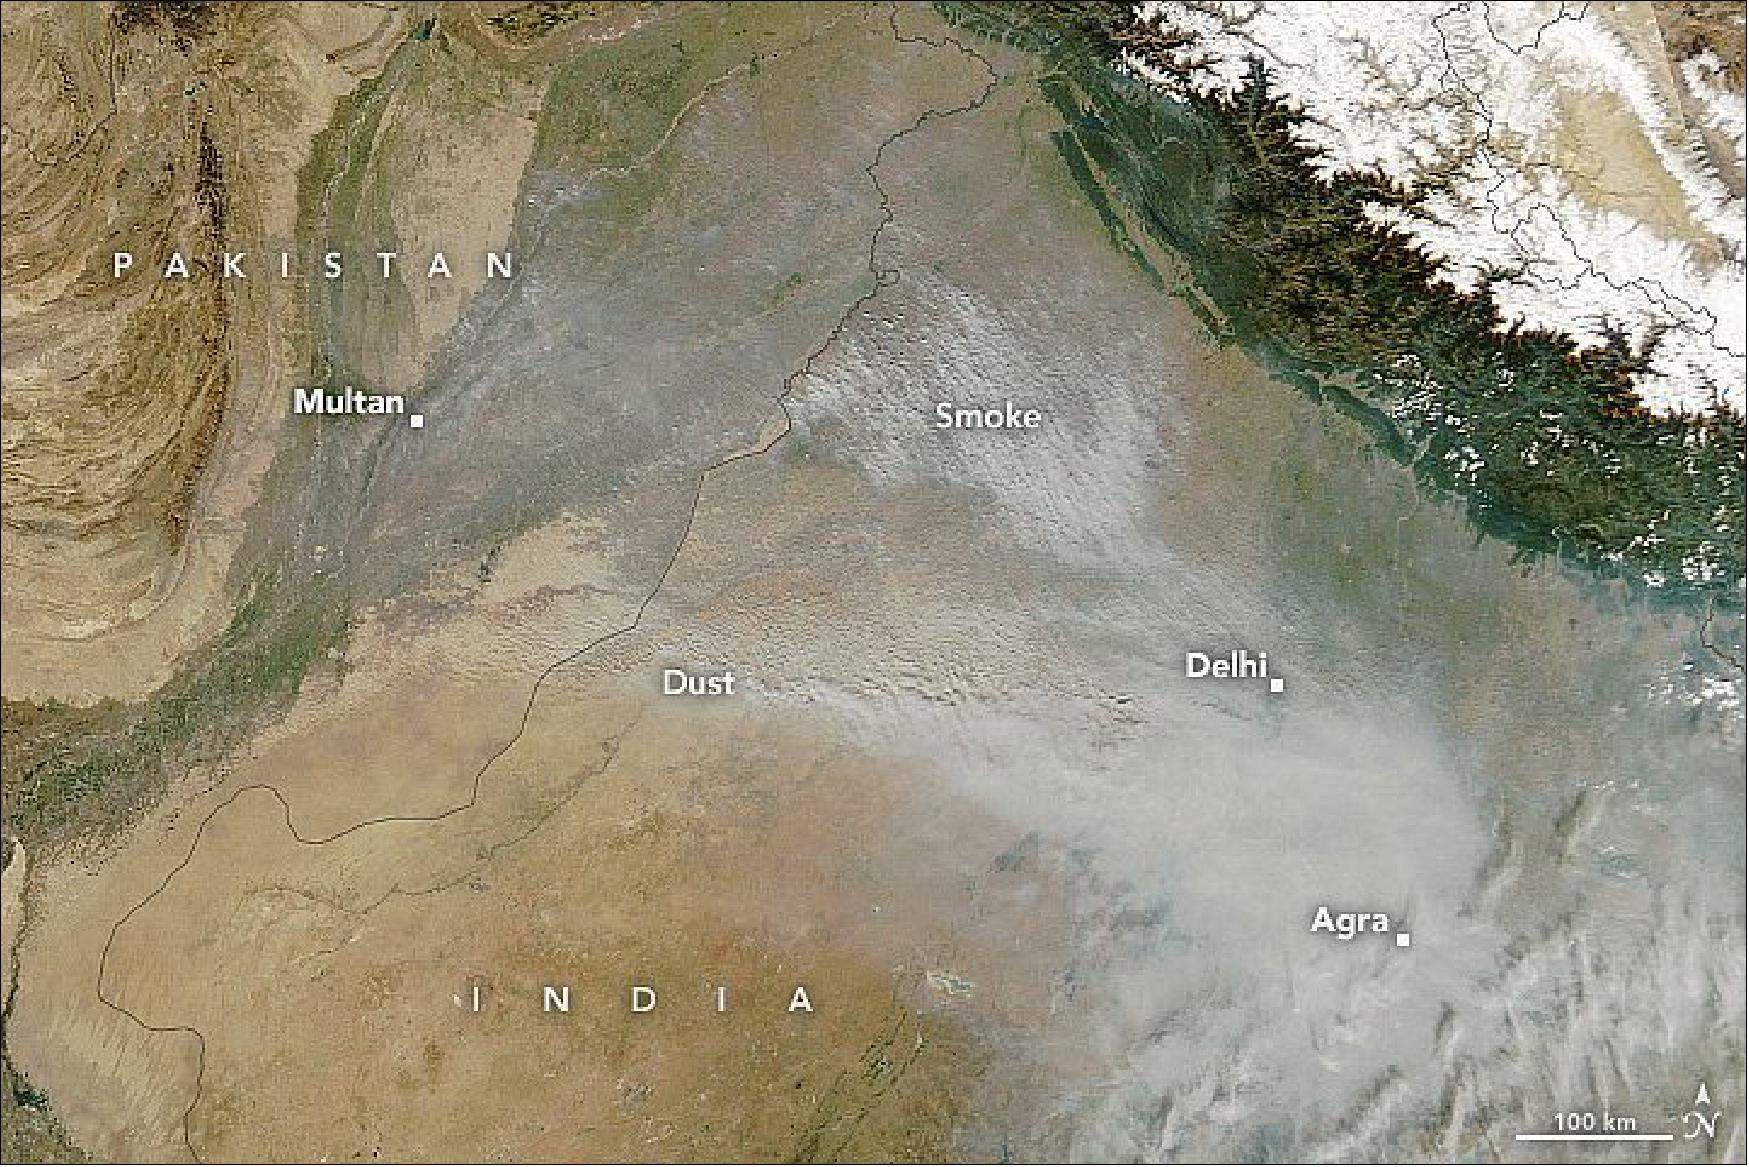 Figure 5: Smoke from crop fires is not the only contributor to the hazy skies. Influxes of dust sometimes arrive from the Thar Desert to the west—as they did on November 12, 2021. An array of other human-caused sources of air pollution in cities, including motor vehicle fumes, industrial and construction activity, fireworks, and fires for heating and cooking also produces particulate matter and other pollutants (image credit: NASA Earth Observatory)